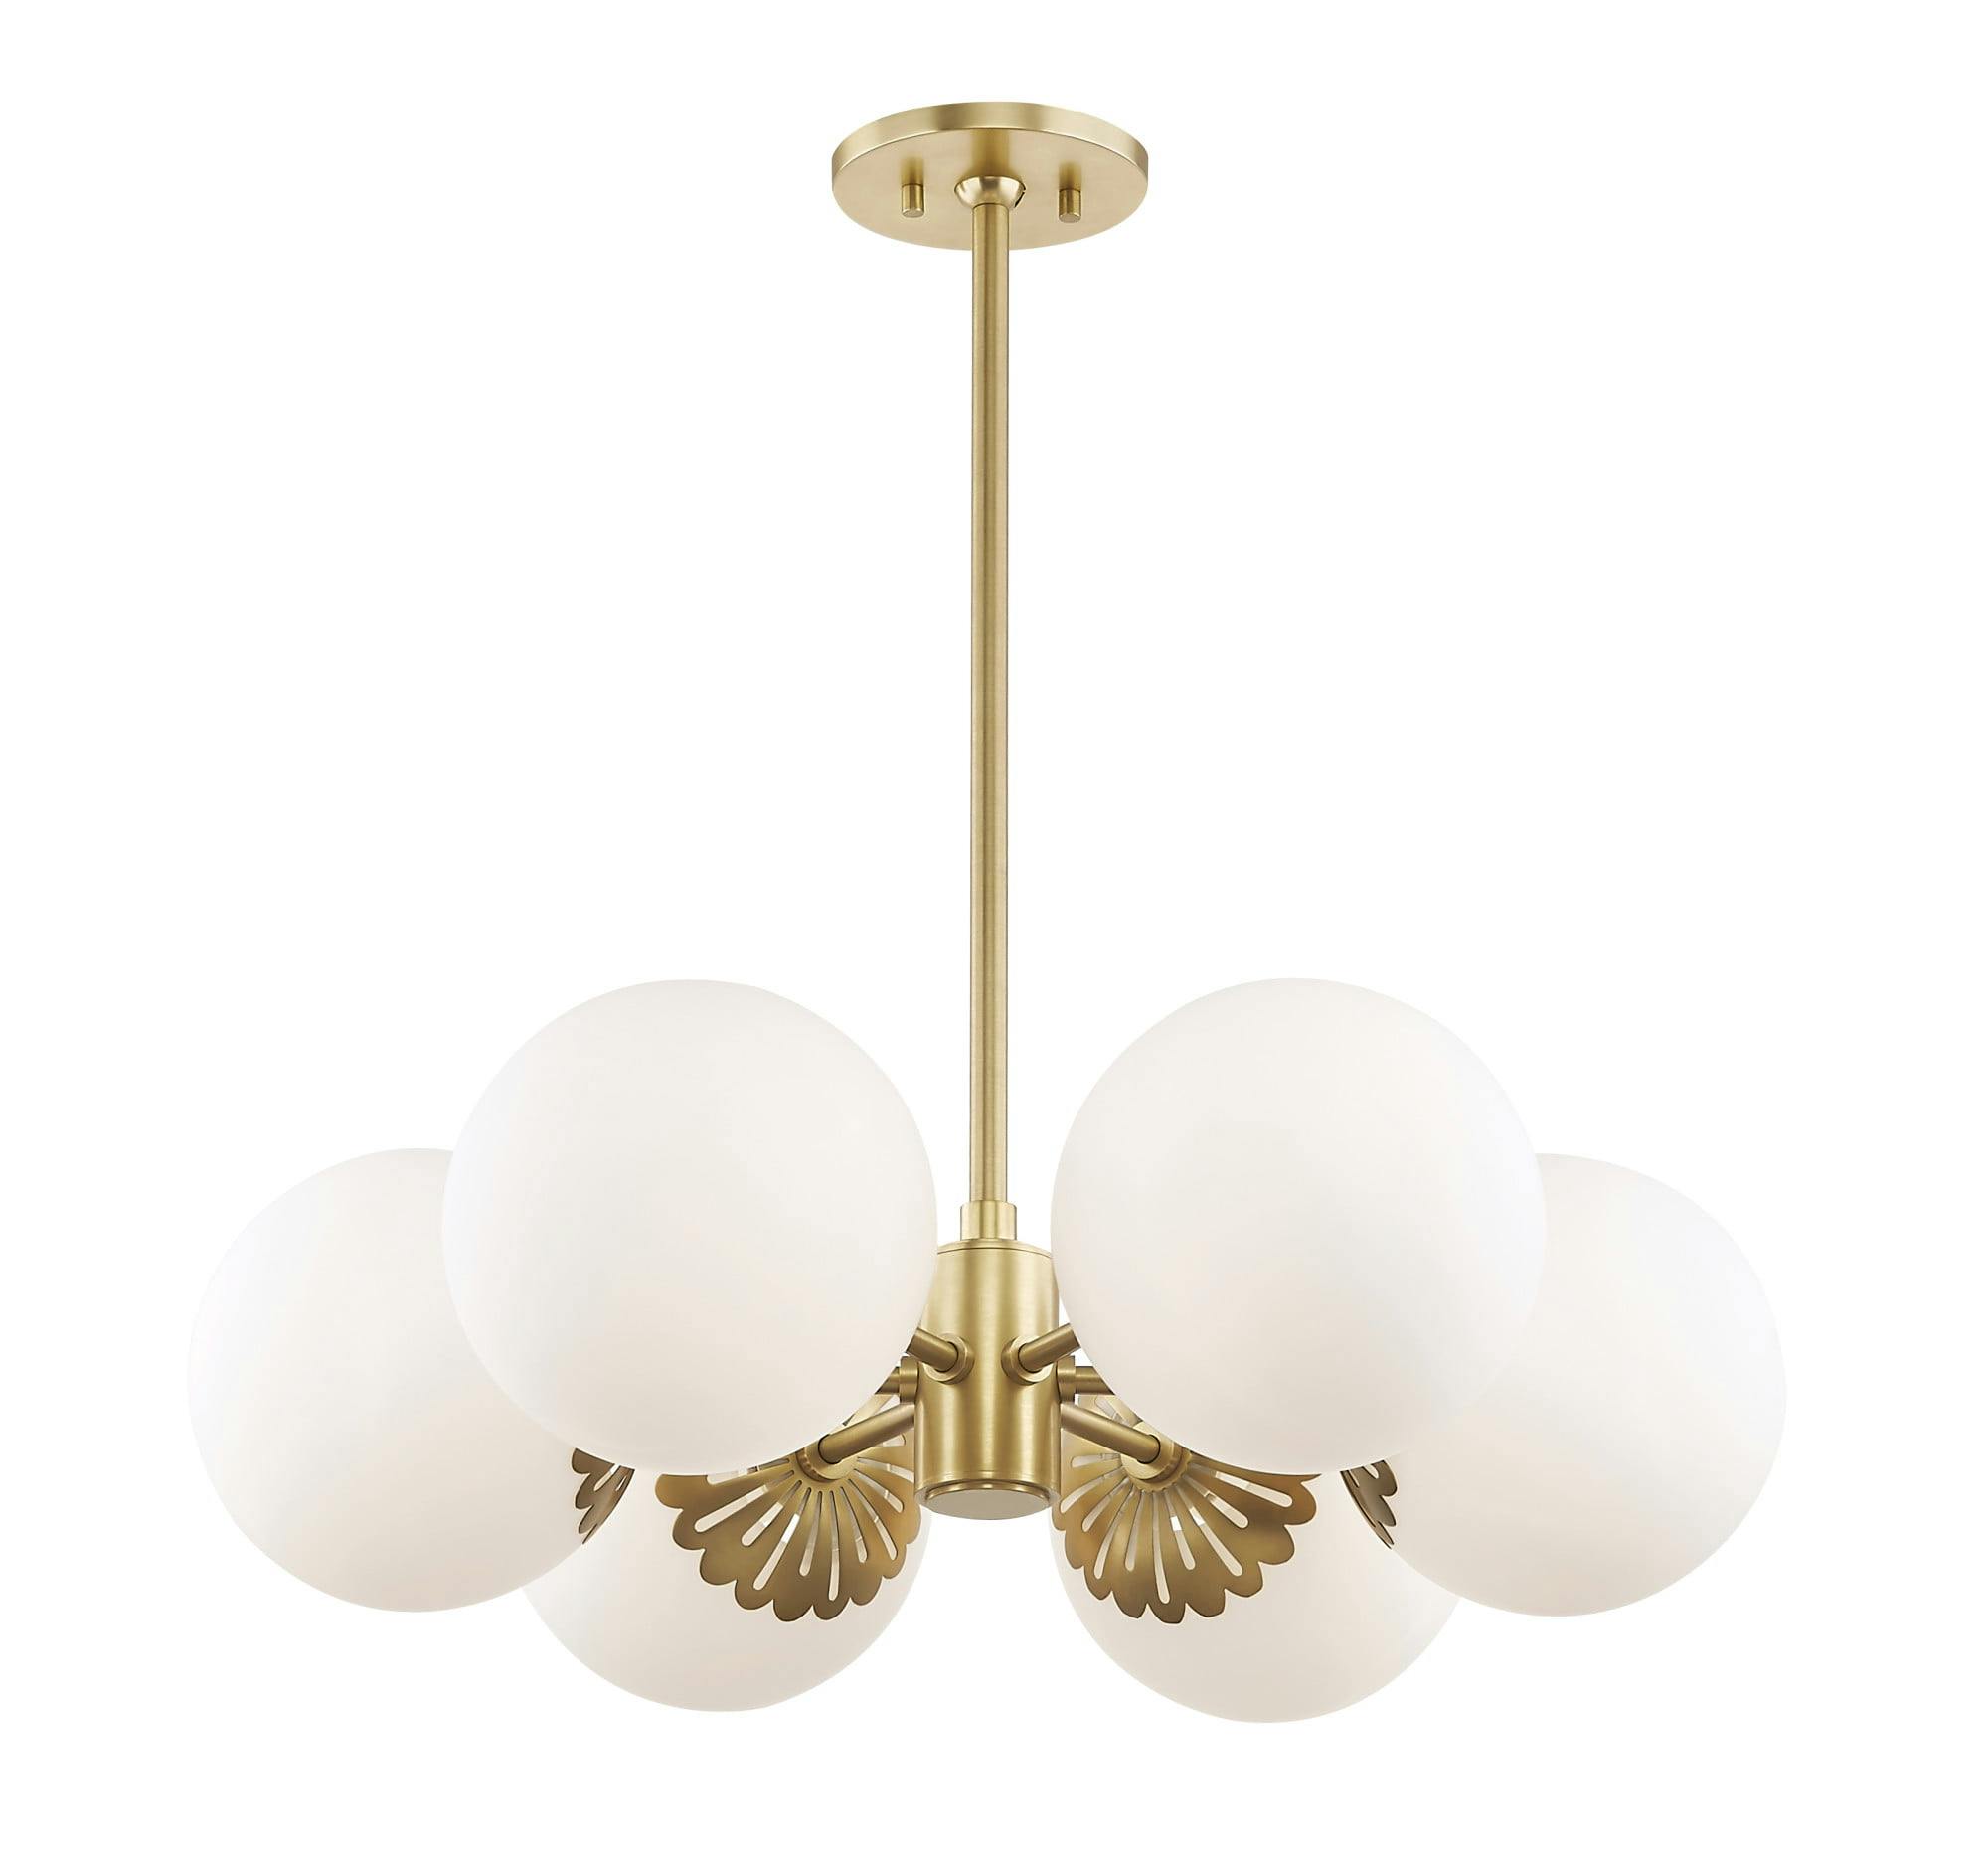 Elegant Aged Brass 6-Light Chandelier with Opal Glass Shades